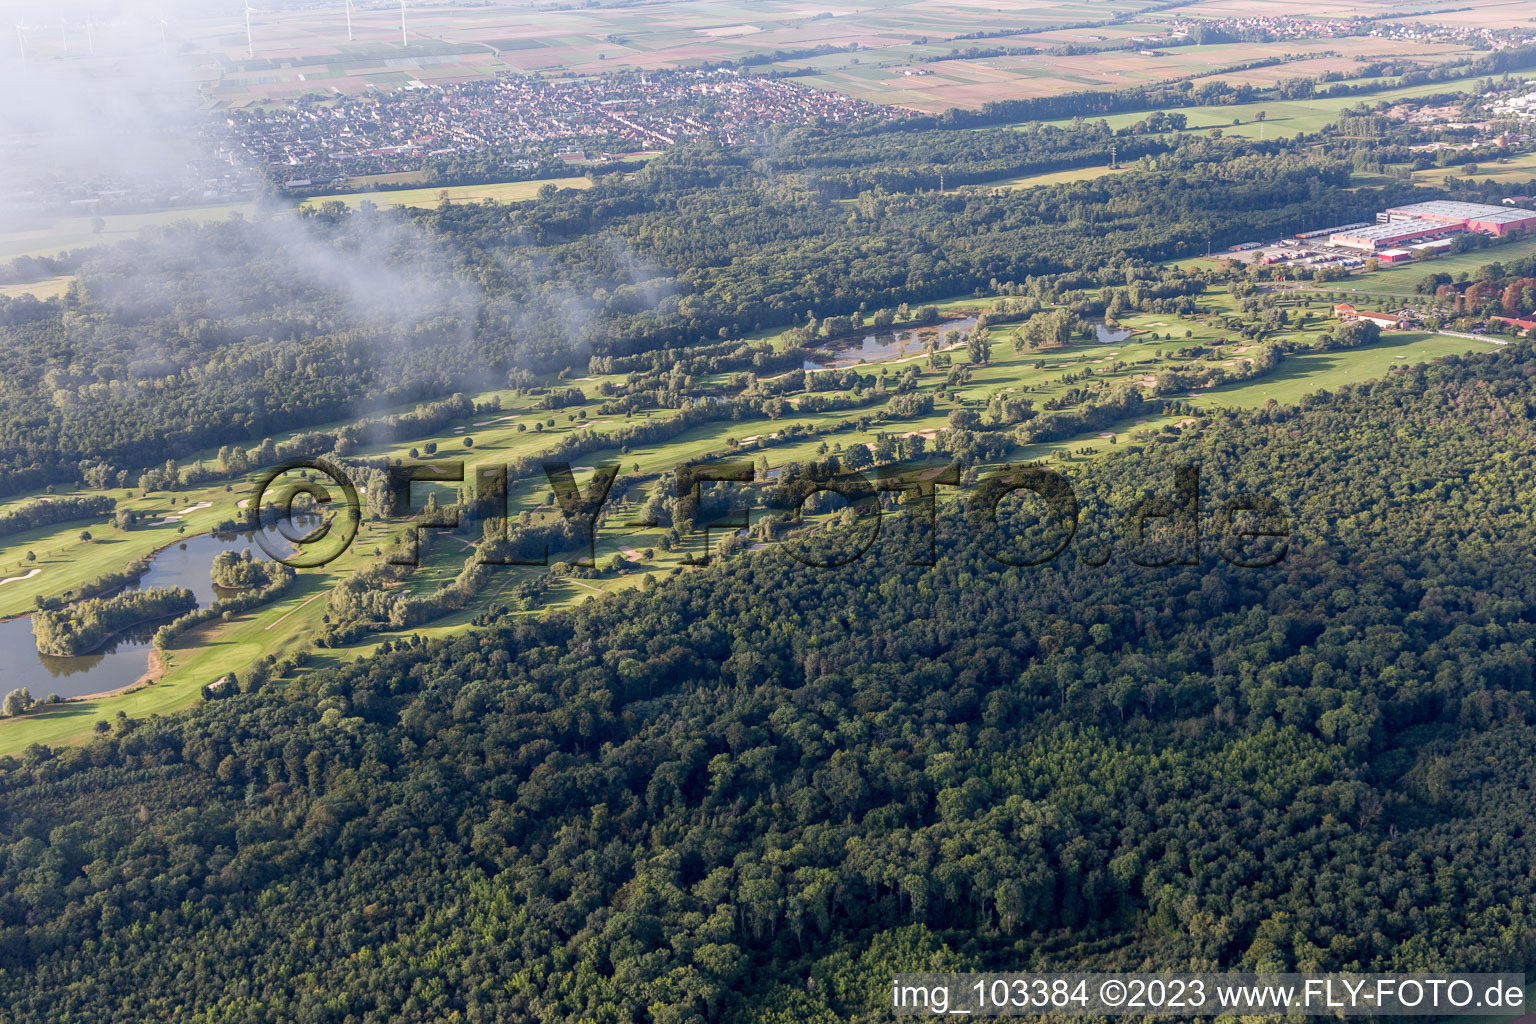 Golf course in Essingen in the state Rhineland-Palatinate, Germany seen from above